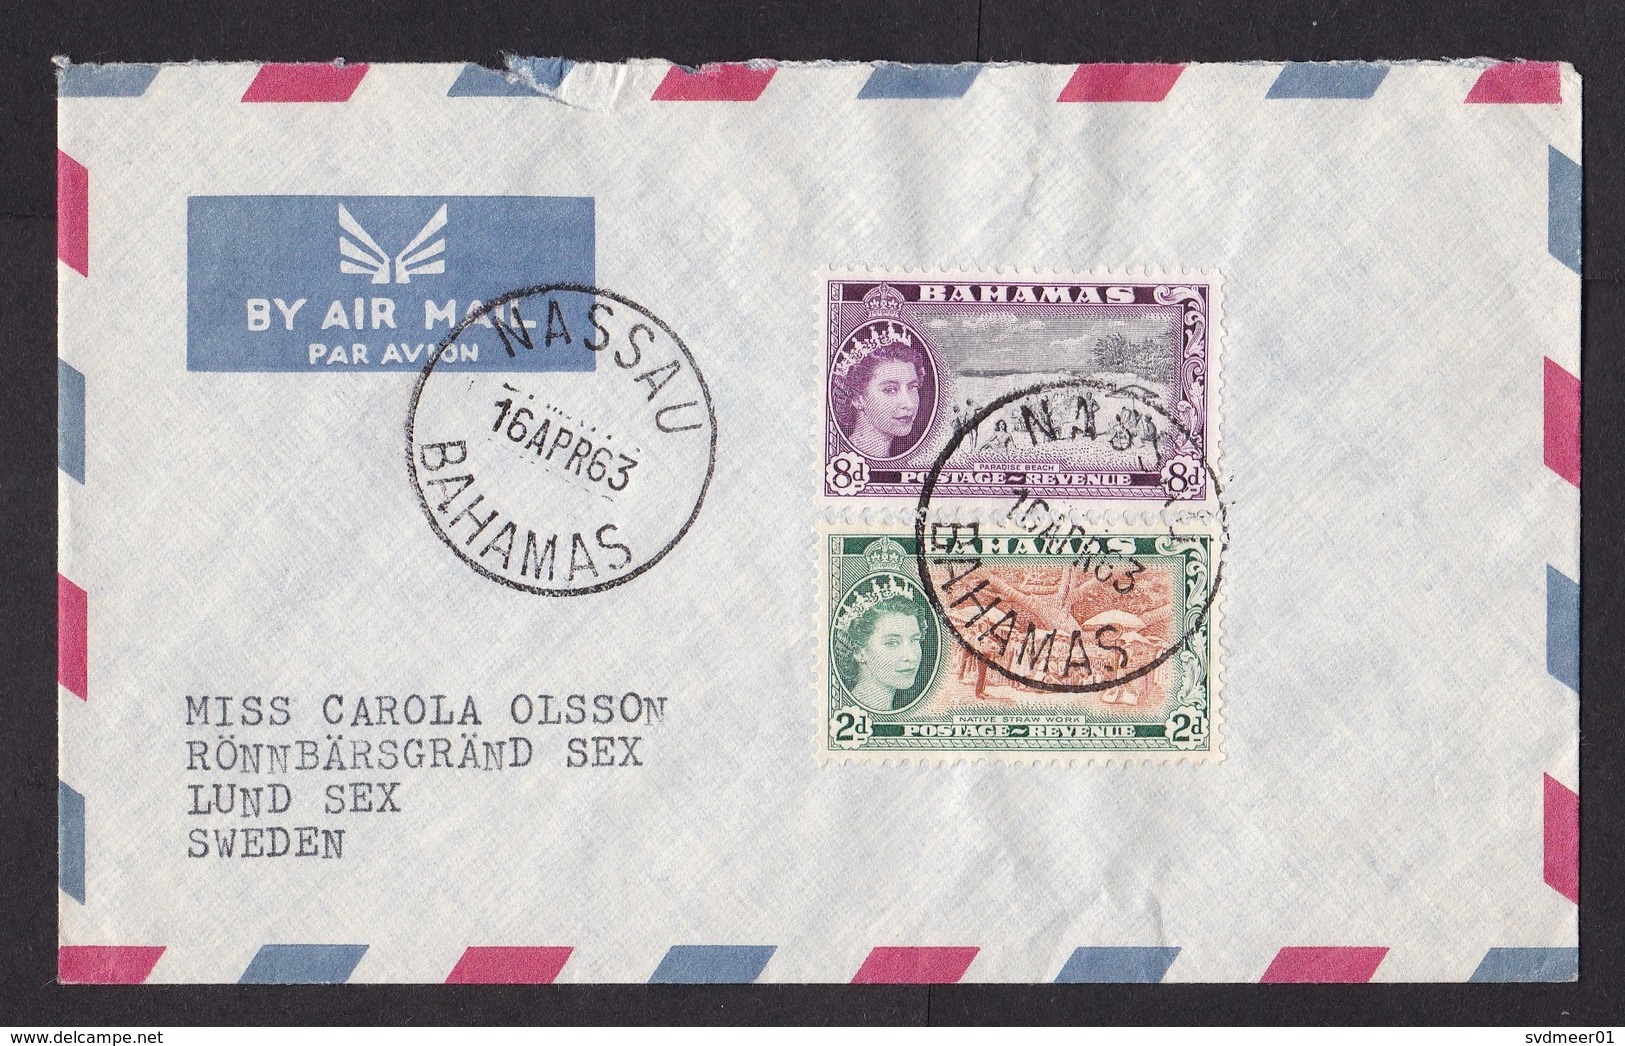 Bahamas: Airmail Cover To Sweden, 2 Stamps, Queen Elizabeth II, QEII, Beach, Native Straw Work (roughly Opened) - 1859-1963 Crown Colony